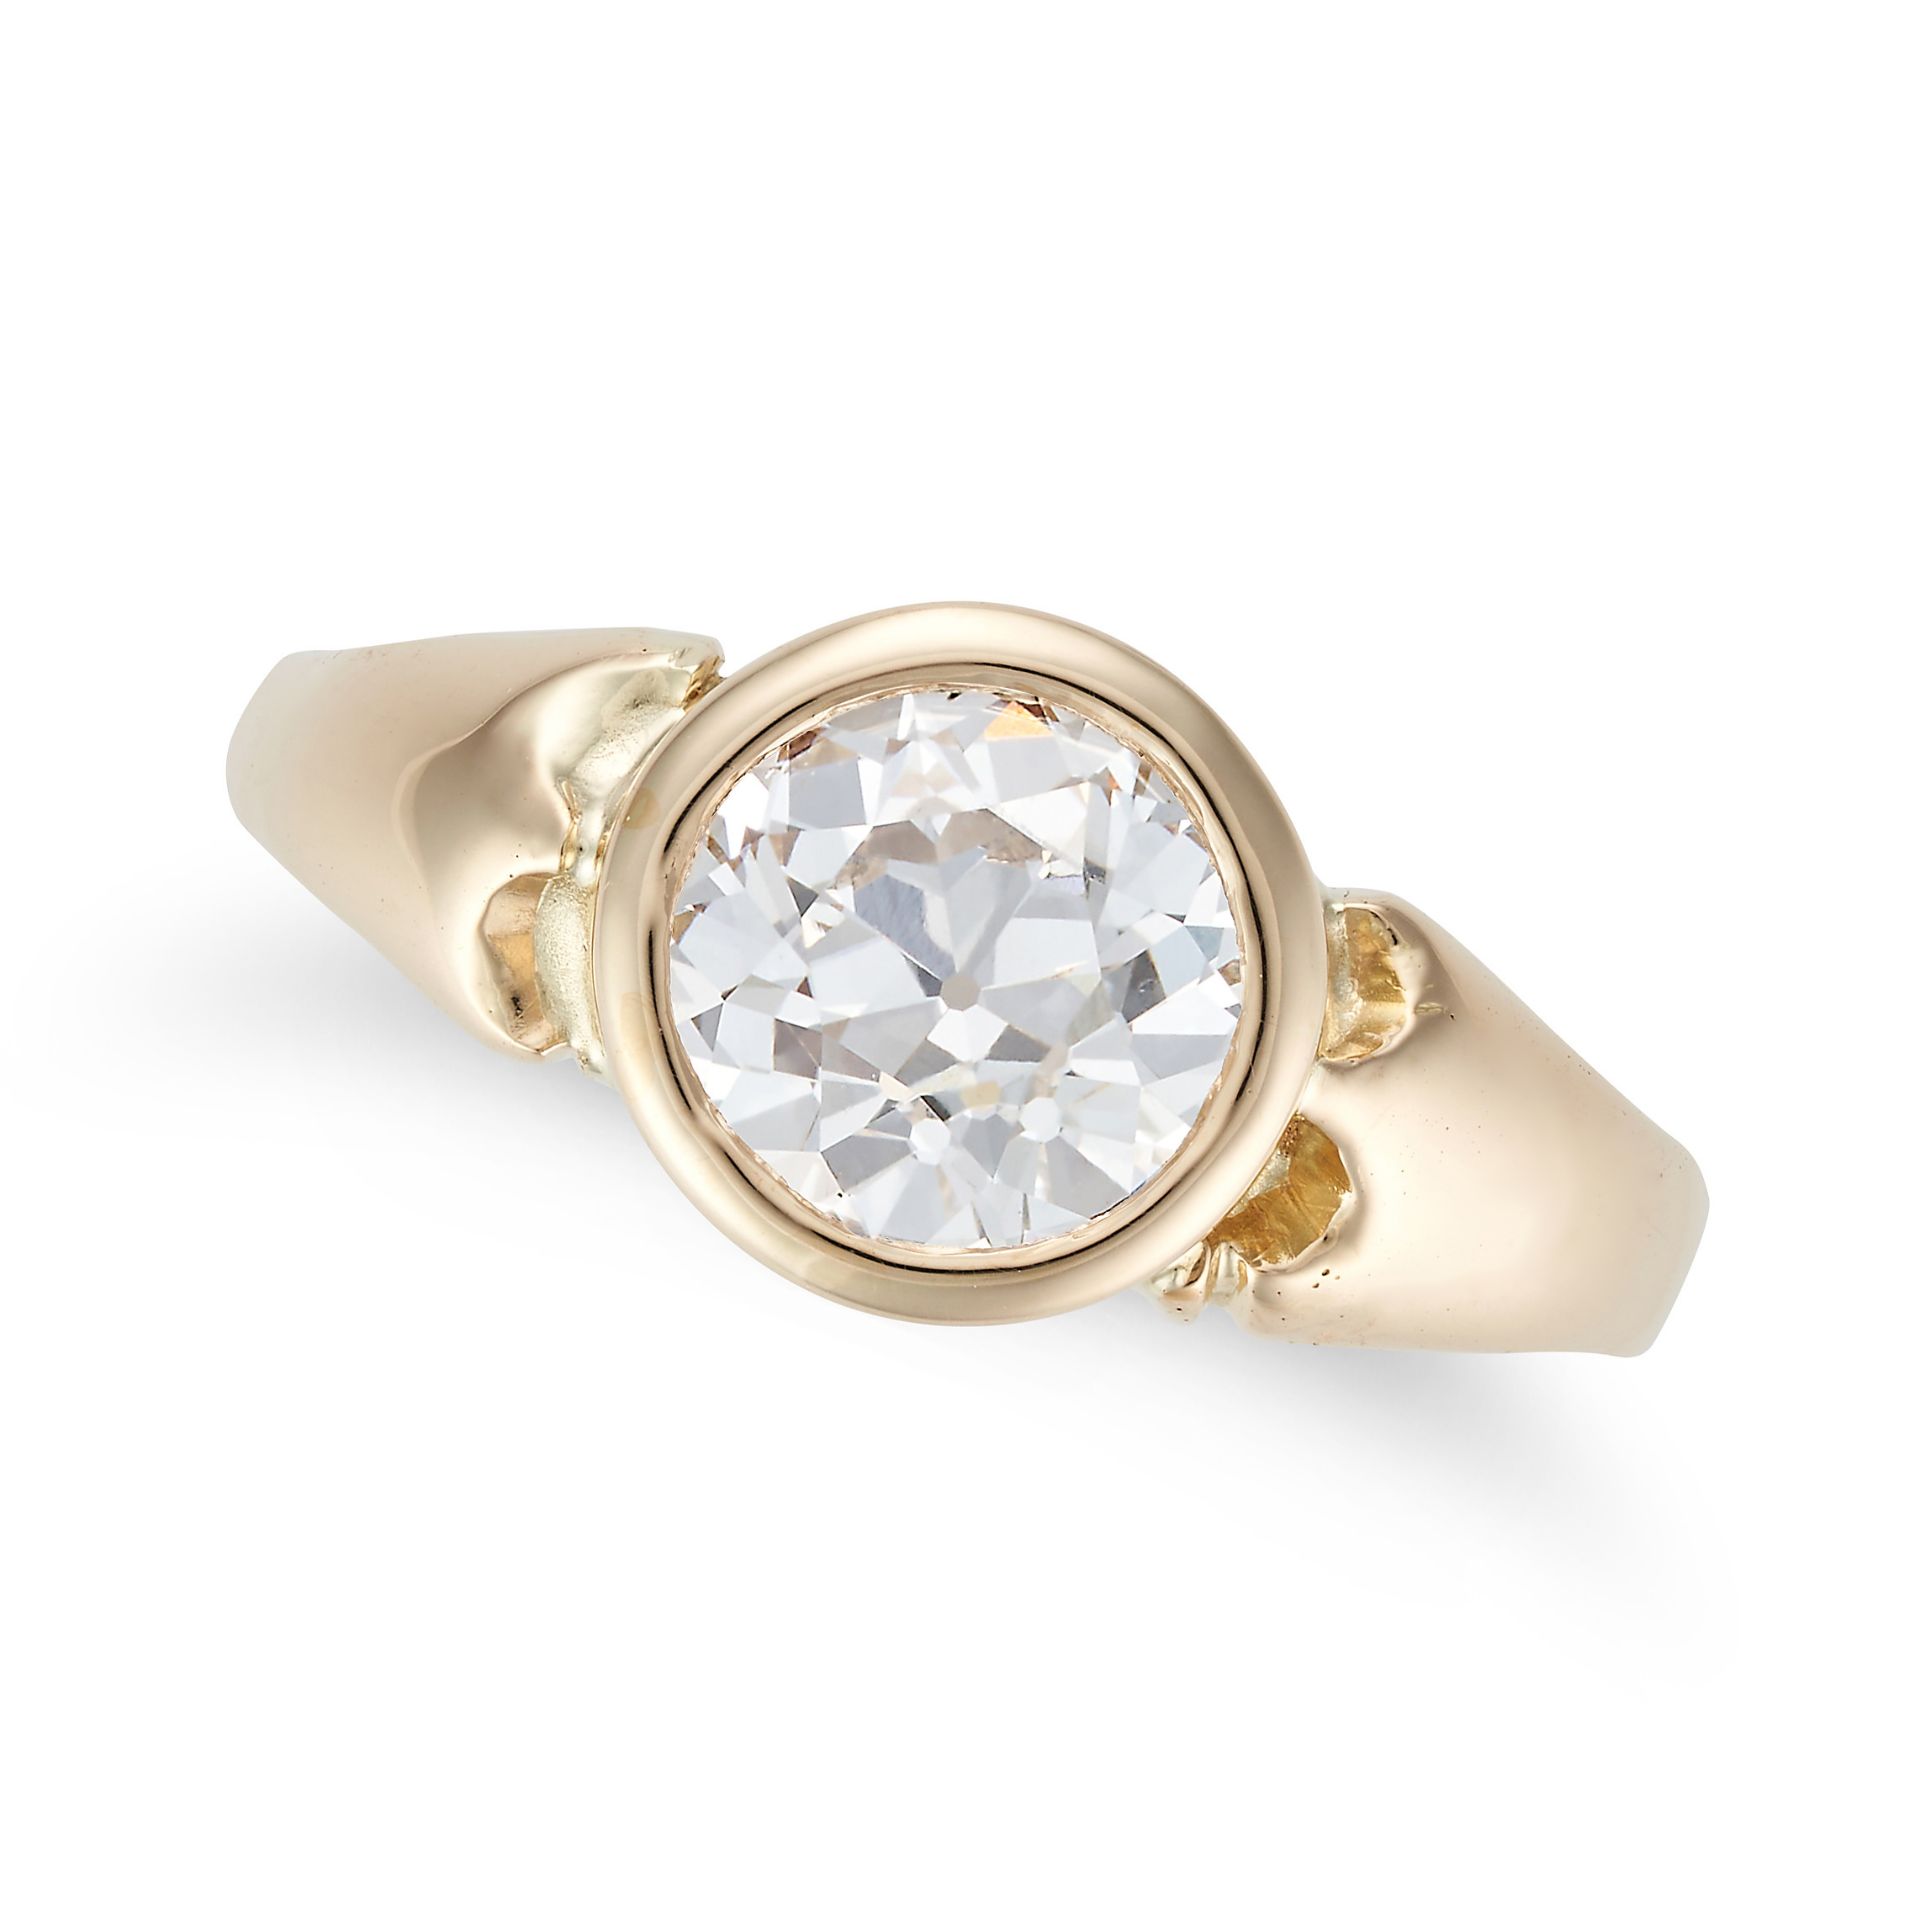 AN ANTIQUE SOLITAIRE DIAMOND RING in 18ct yellow gold, set with an old European cut diamond of ap...